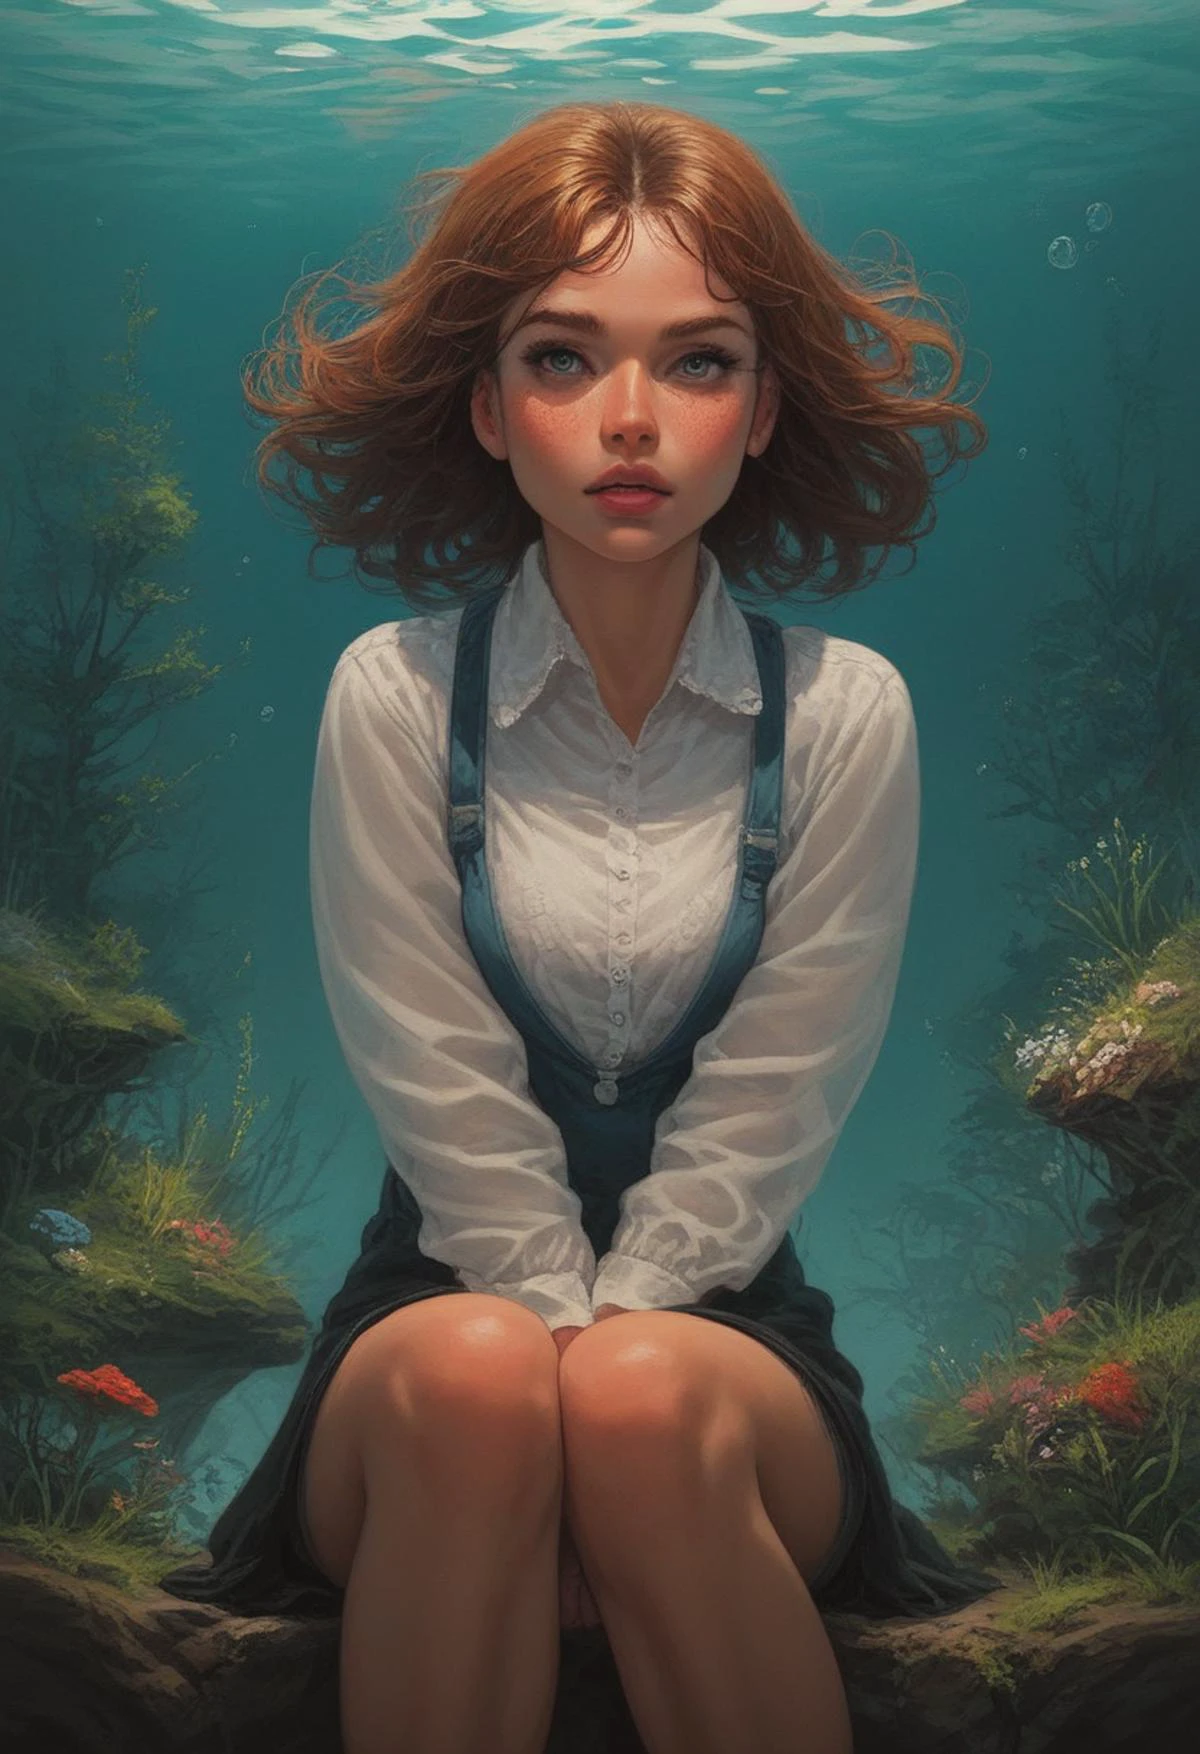 score_9, score_8_up, score_7_up, source_photo, 18 year old, solo, fully clothed, 
1girl, incredibly attractive, Sitting with legs extended, Concealer, Classic Ivy League Haircut with, Brownie , Underwater Grotto with Bioluminescent Creatures, 
l4rg33y3s